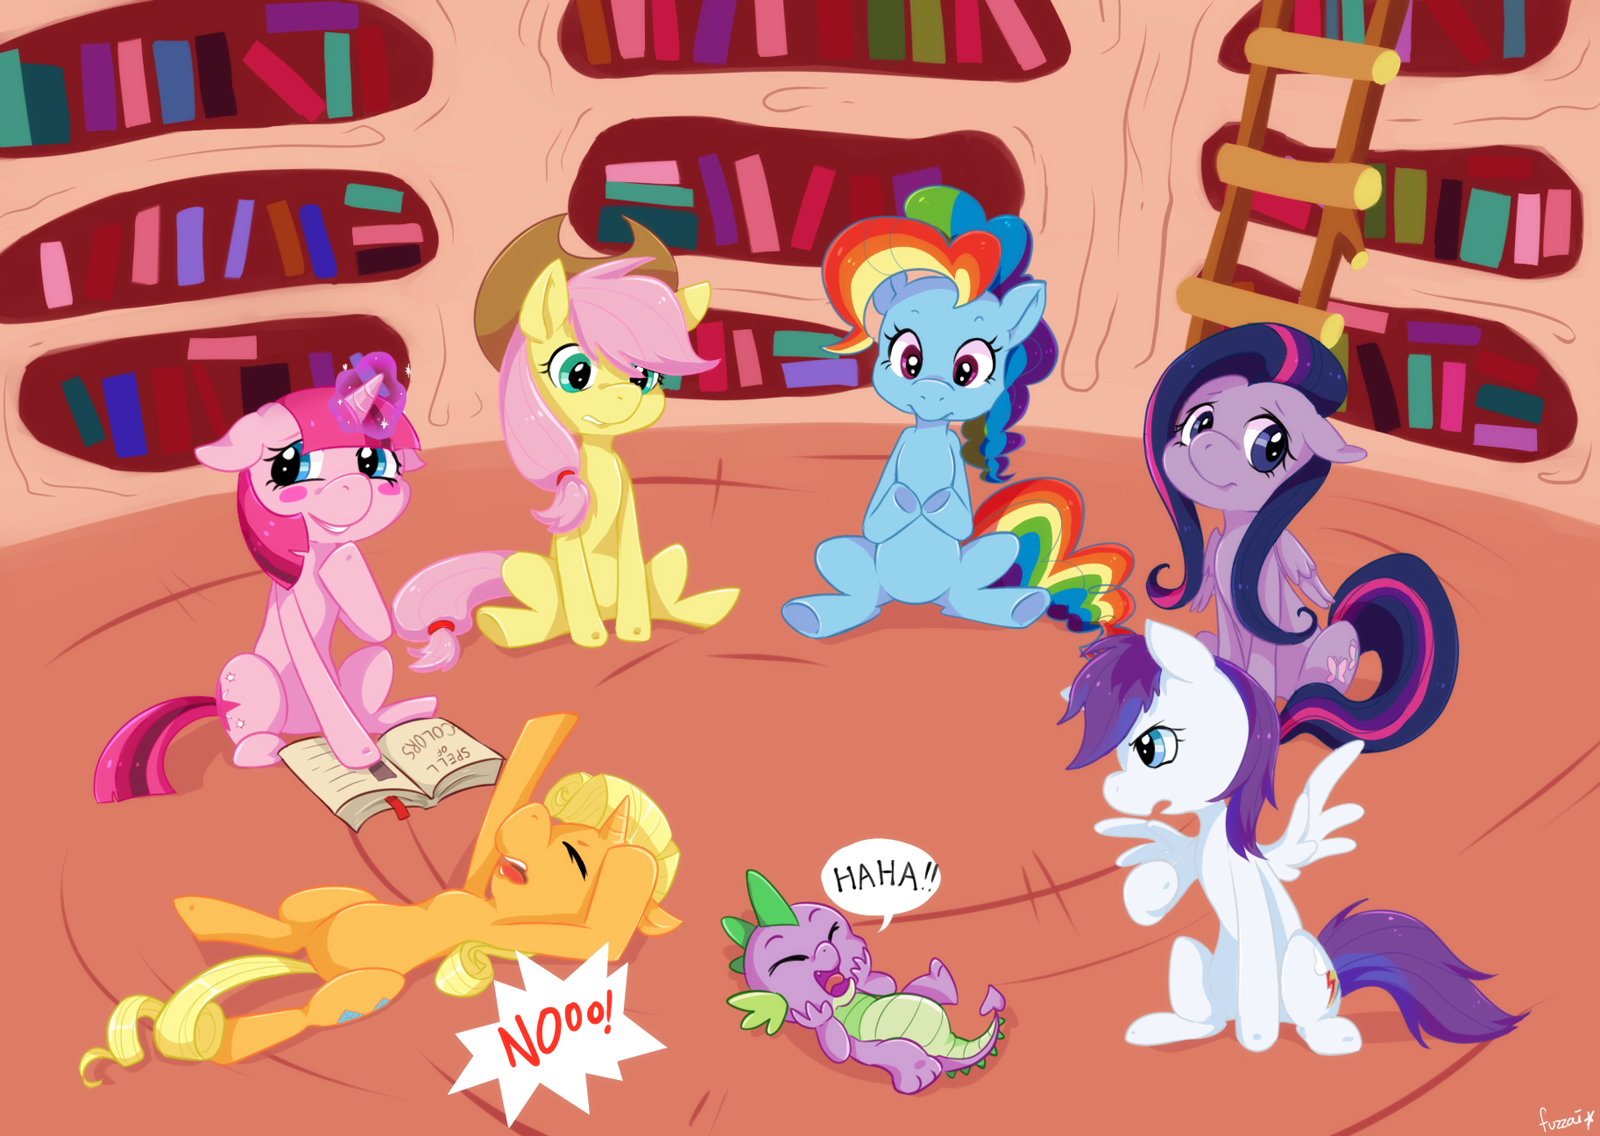 Funny pictures, videos and other media thread! - Page 14 183549+-+applejack+artist+fuzzai+fluttershy+pinkie_pie+rainbow_dash+rarity+recolors+twilight_sparkle